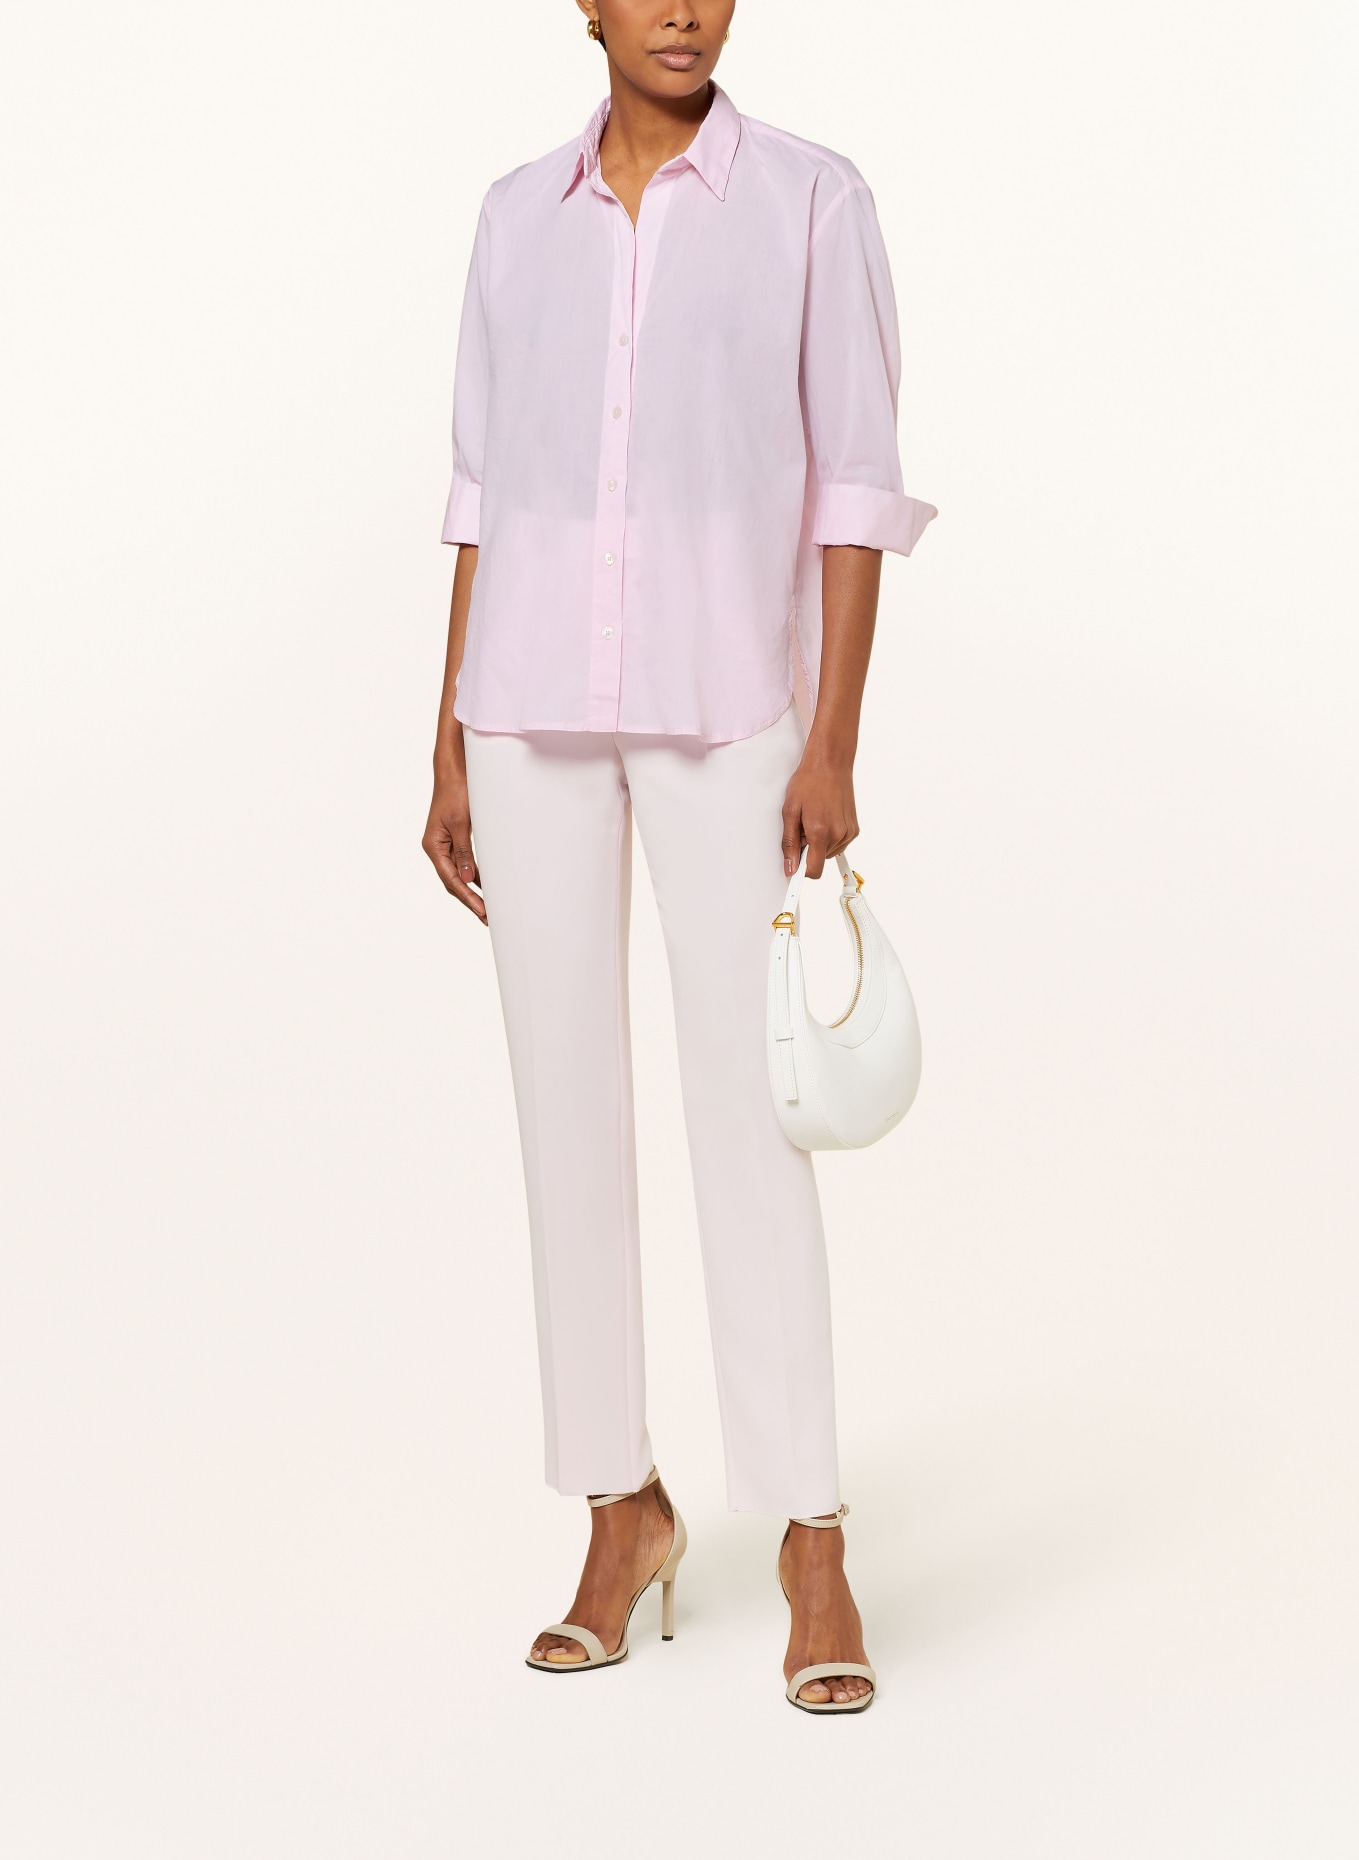 lilienfels Shirt blouse with 3/4 sleeves, Color: LIGHT PINK (Image 2)